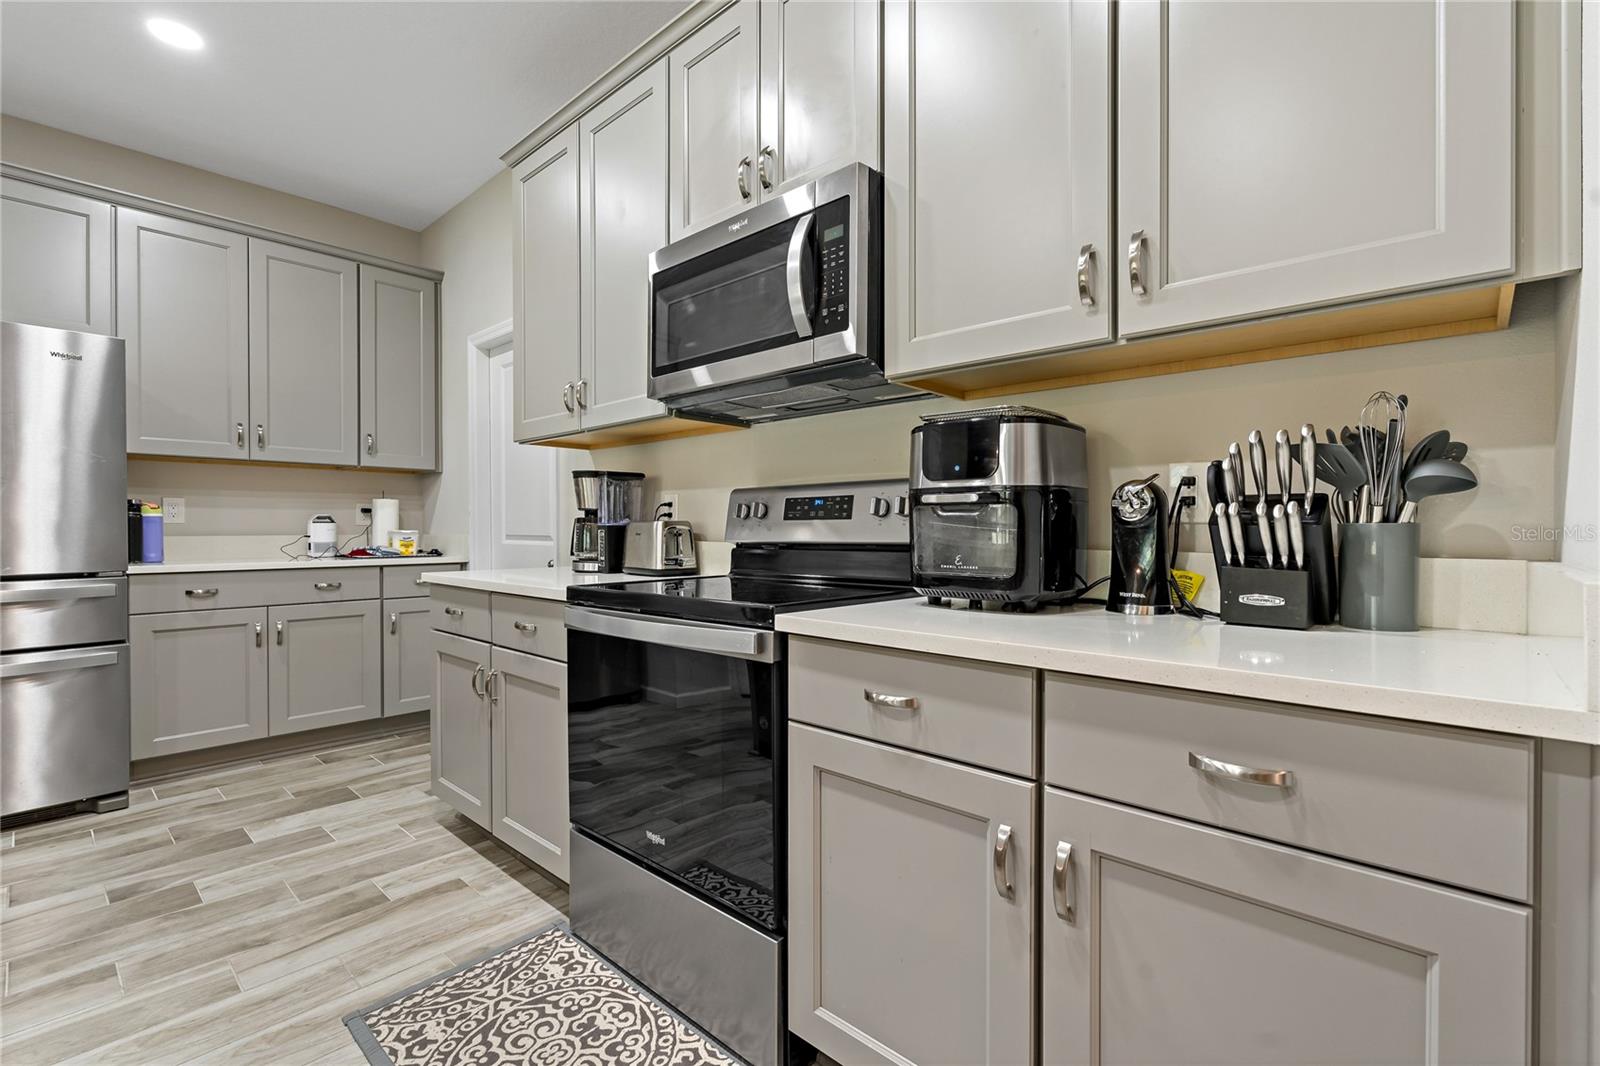 All Stainless Steel Appliances With Lots of Cabinet Space